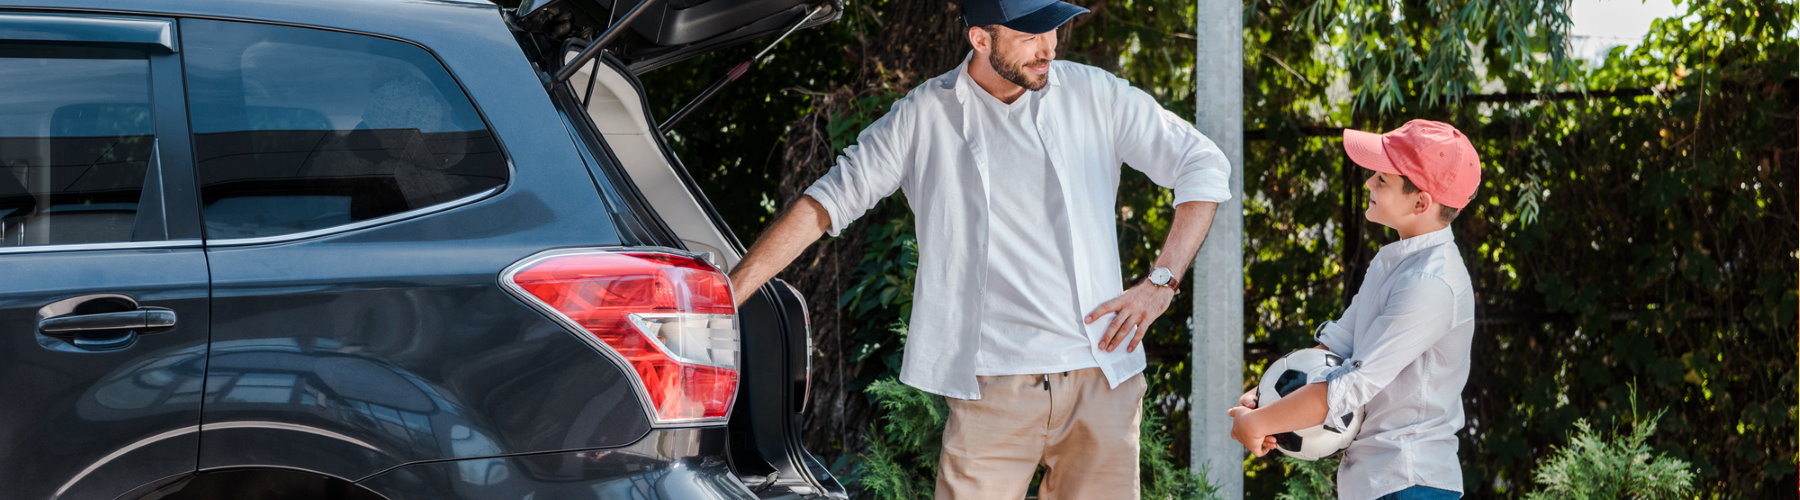 Auto insurance represented by a man and son standing by vehicle